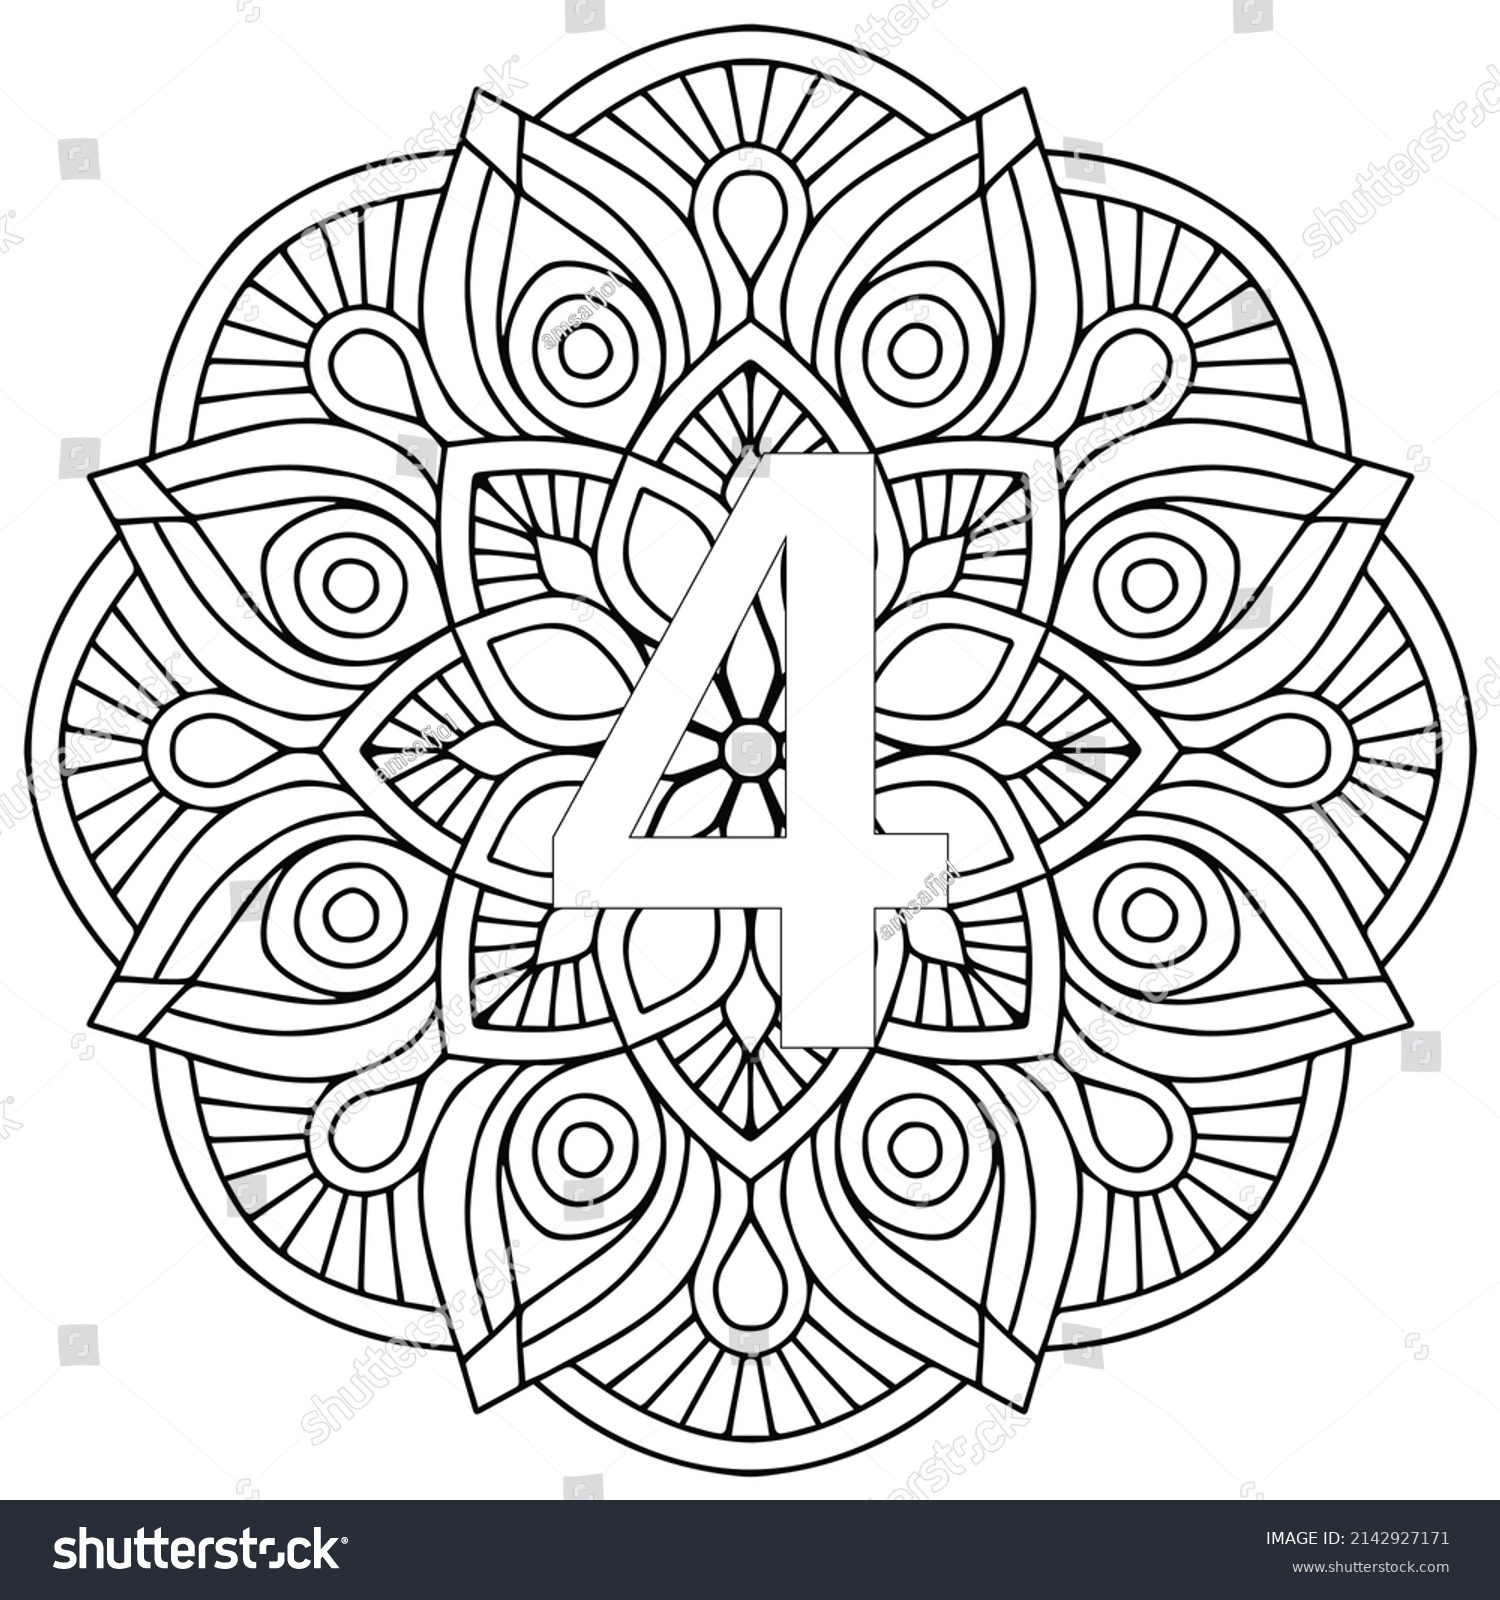 SVG of Vector Coloring page for adults. Contour black and white Number 4 on a beautiful mandala background svg